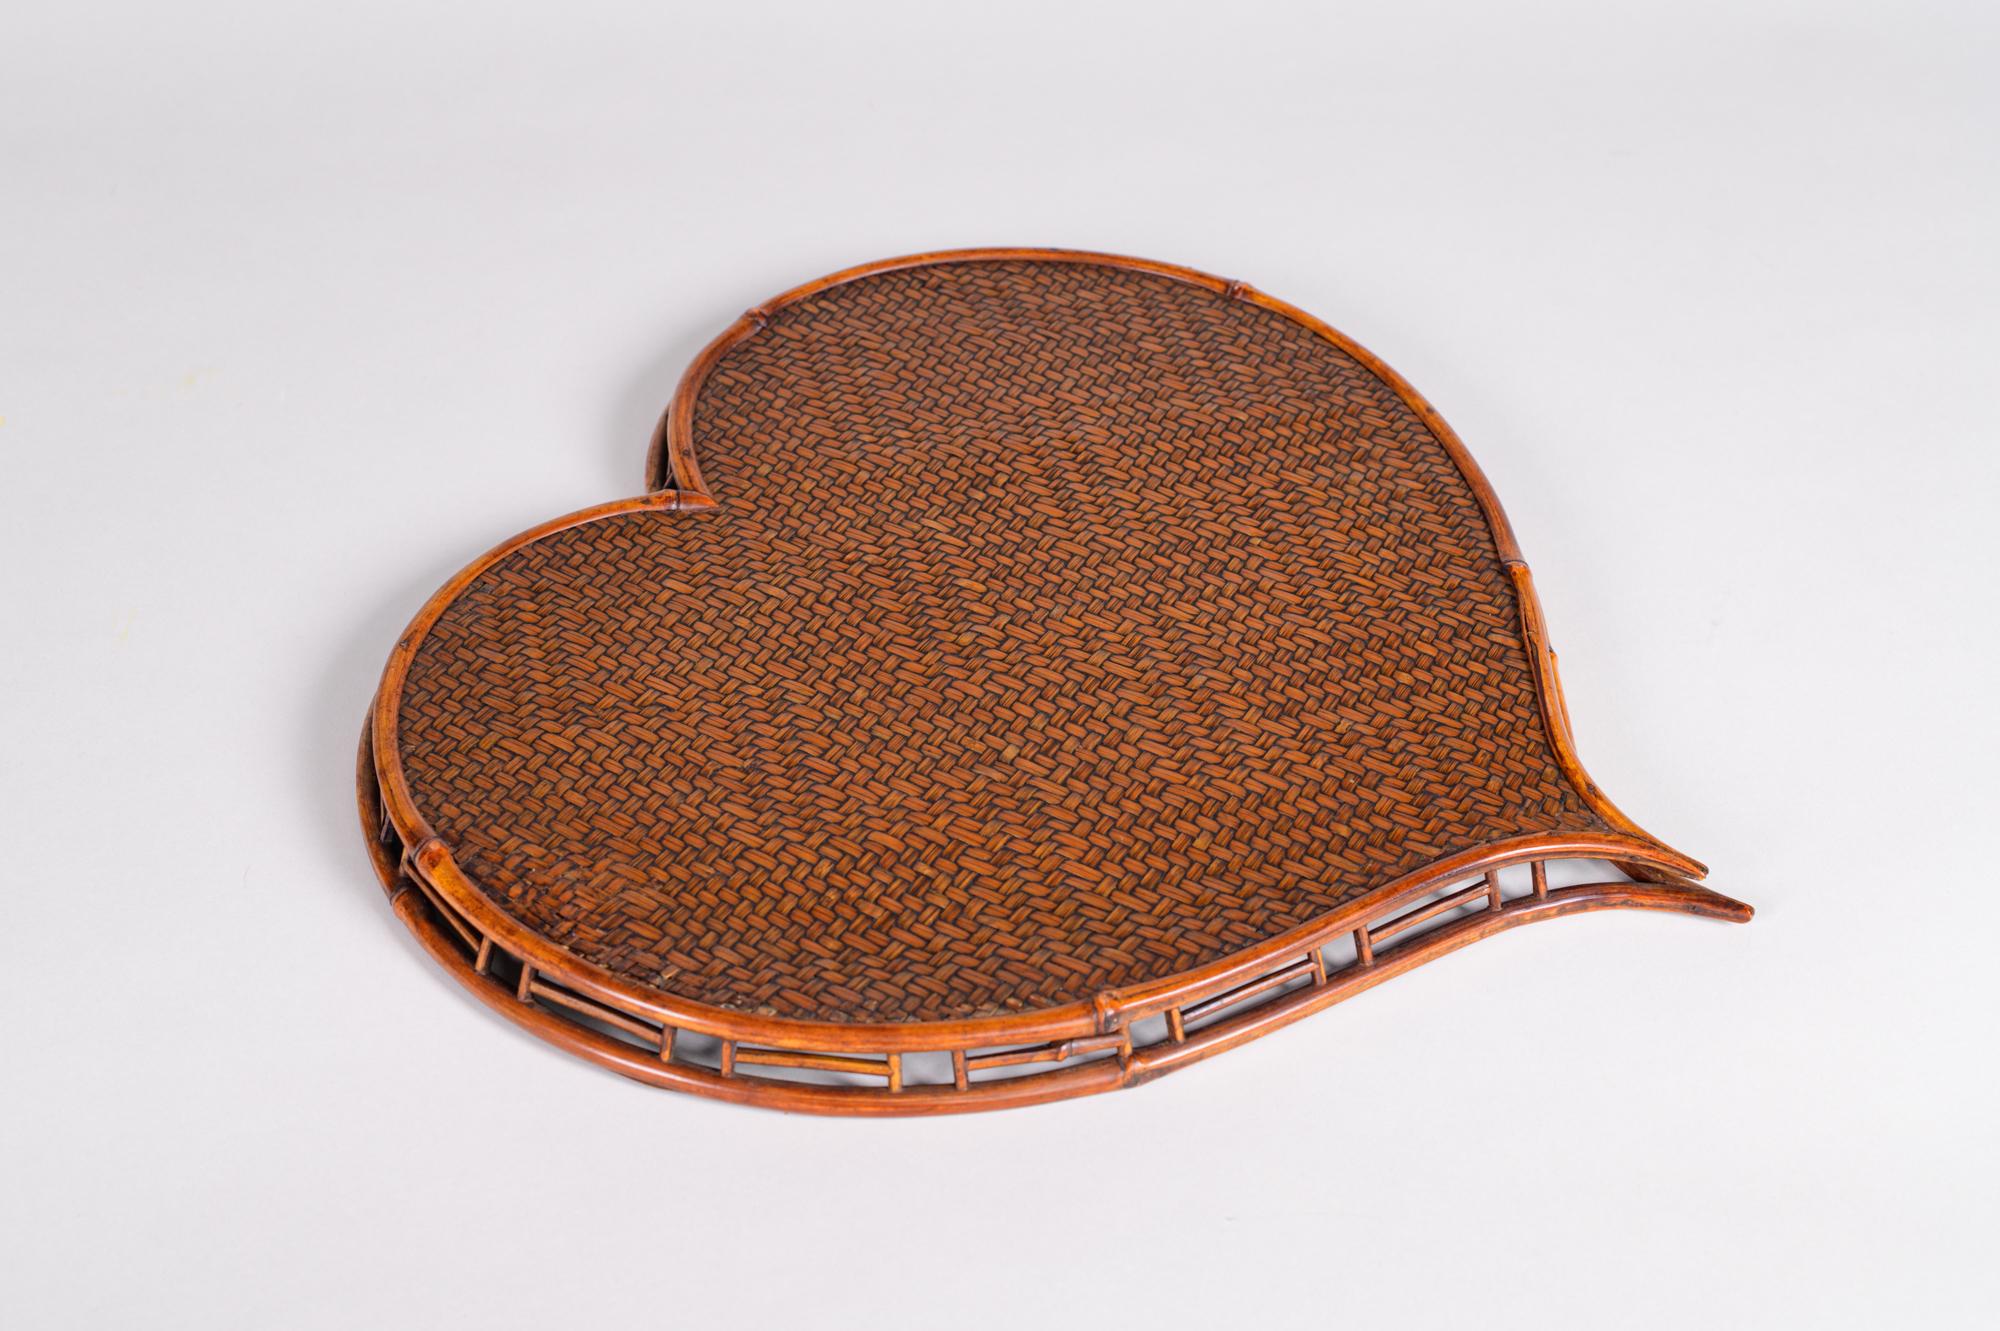 Heart shaped rattan and bamboo tray. Meiji period (1868-1912) woven tray in a highly unusual shape for a tray. Beautiful patina.